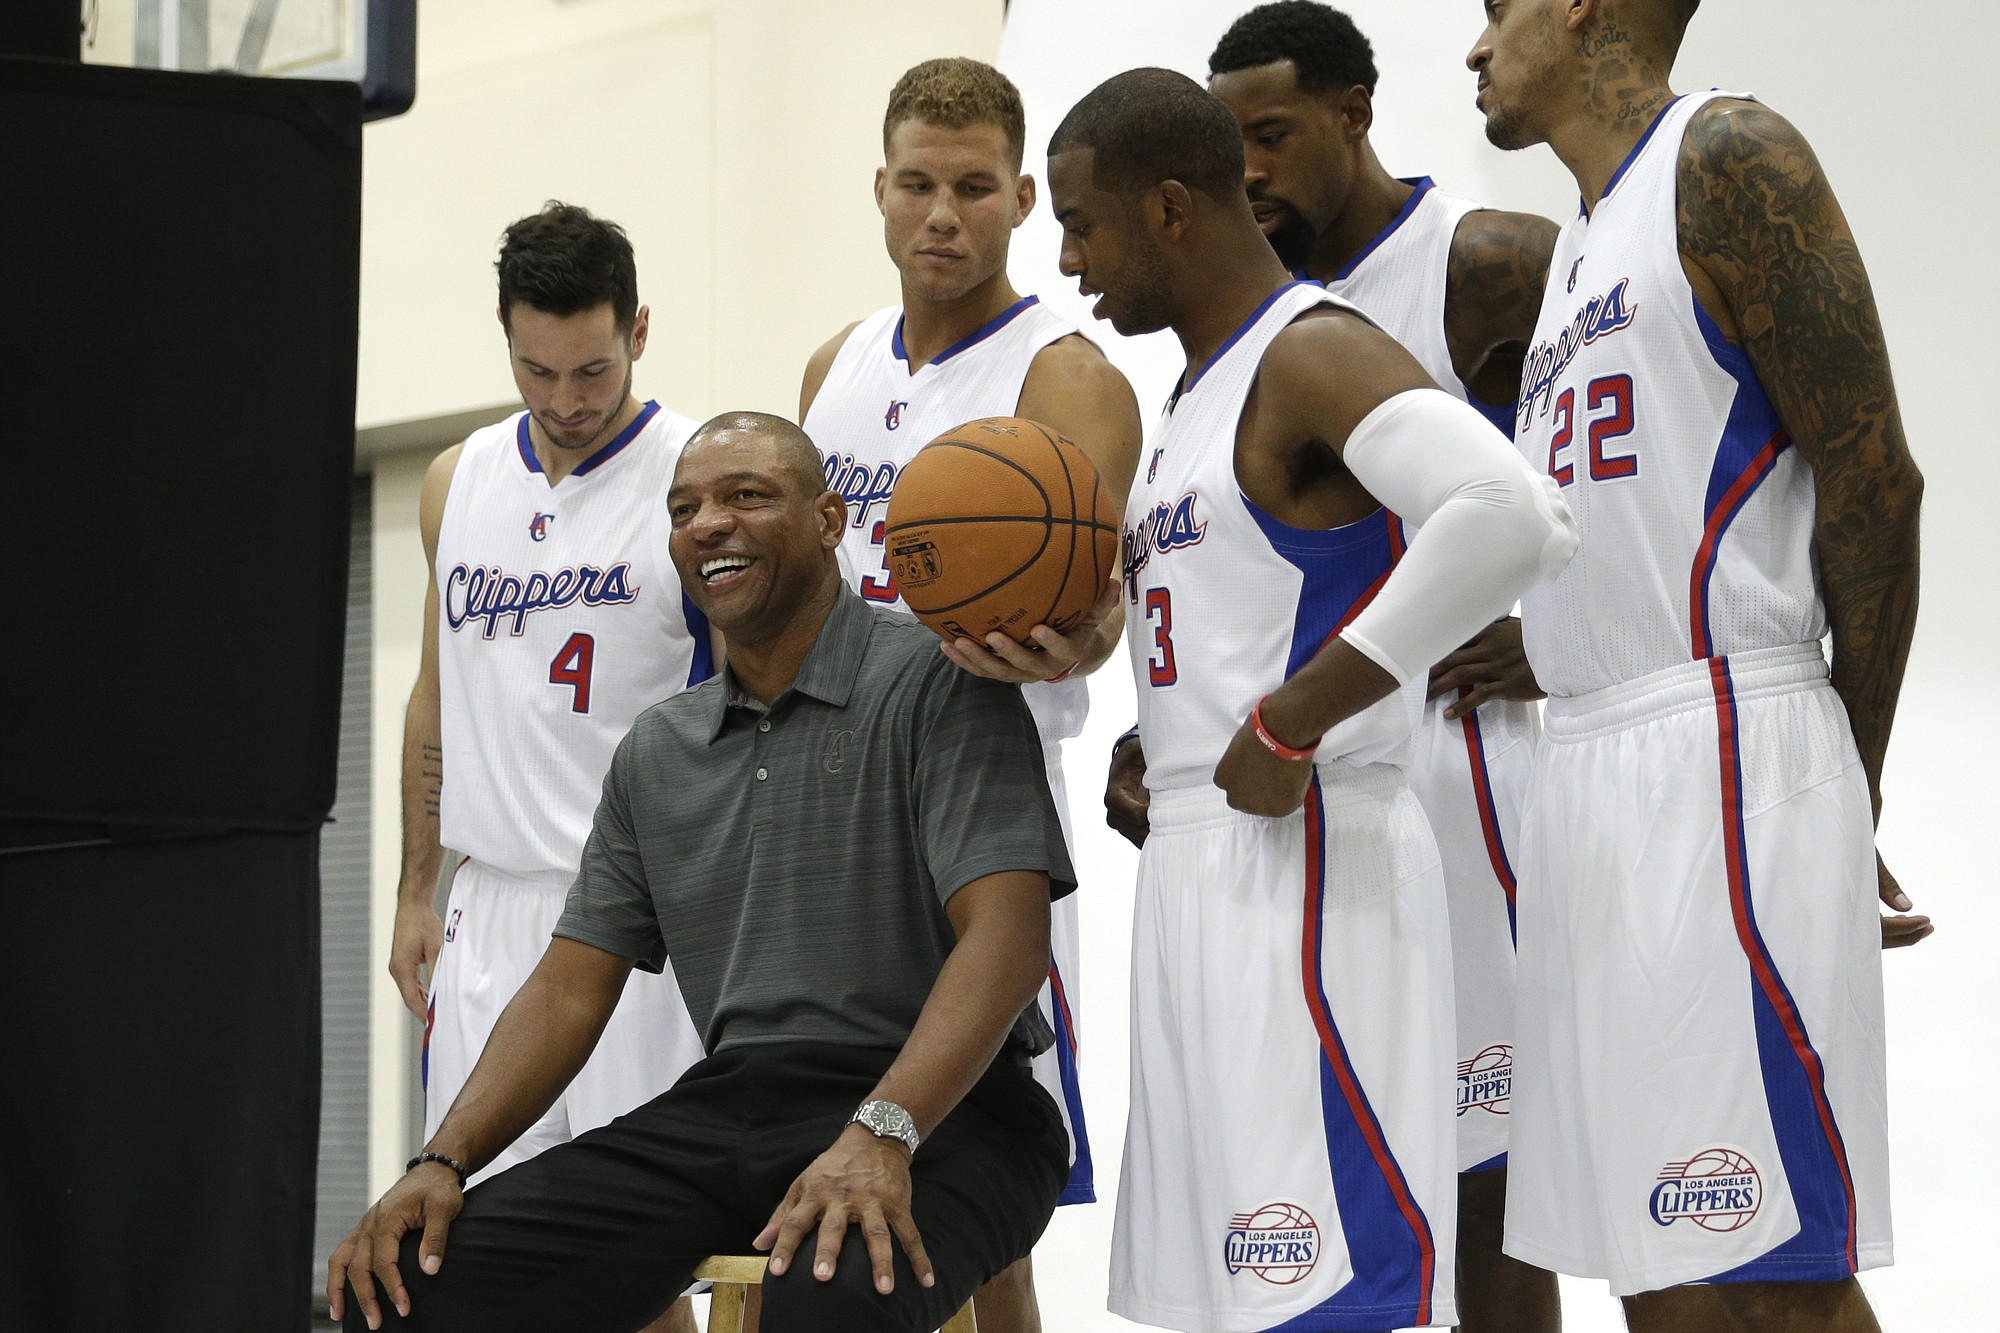 Los Angeles Clippers' Doc Rivers, sitting on a stool, smiles as he poses with players, from left, J.J. Redick, Blake Griffin, Chris Paul, DeAndre Jordan, Matt Barnes during the team's media day Monday, Sept. 29, 2014, in Los Angeles. (AP Photo/Jae C.